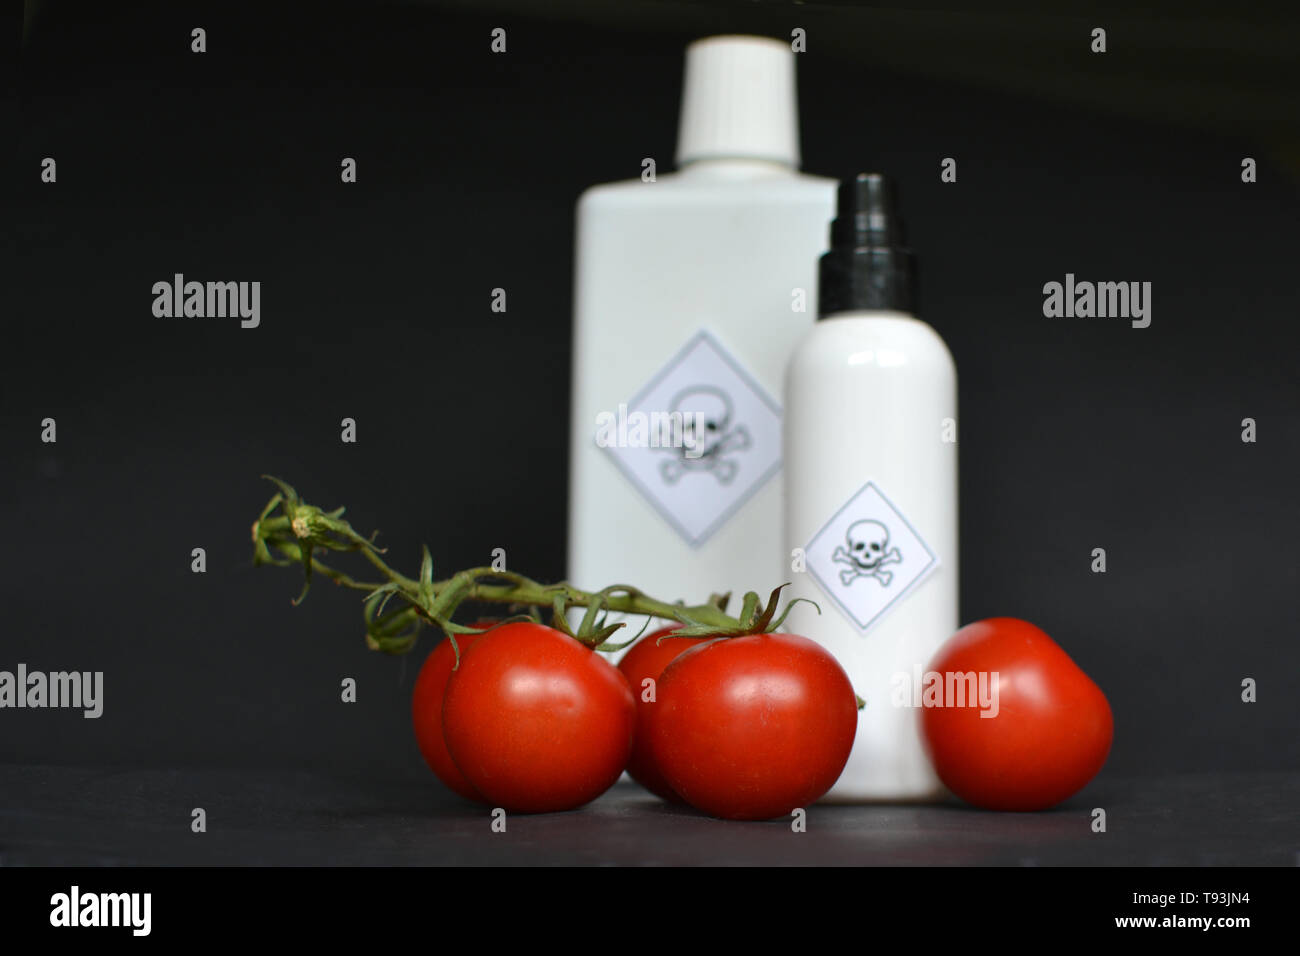 esticides in agricultural food products with red tomatoes in foreground and blurry white bottles with poisonous warning label  on black background Stock Photo